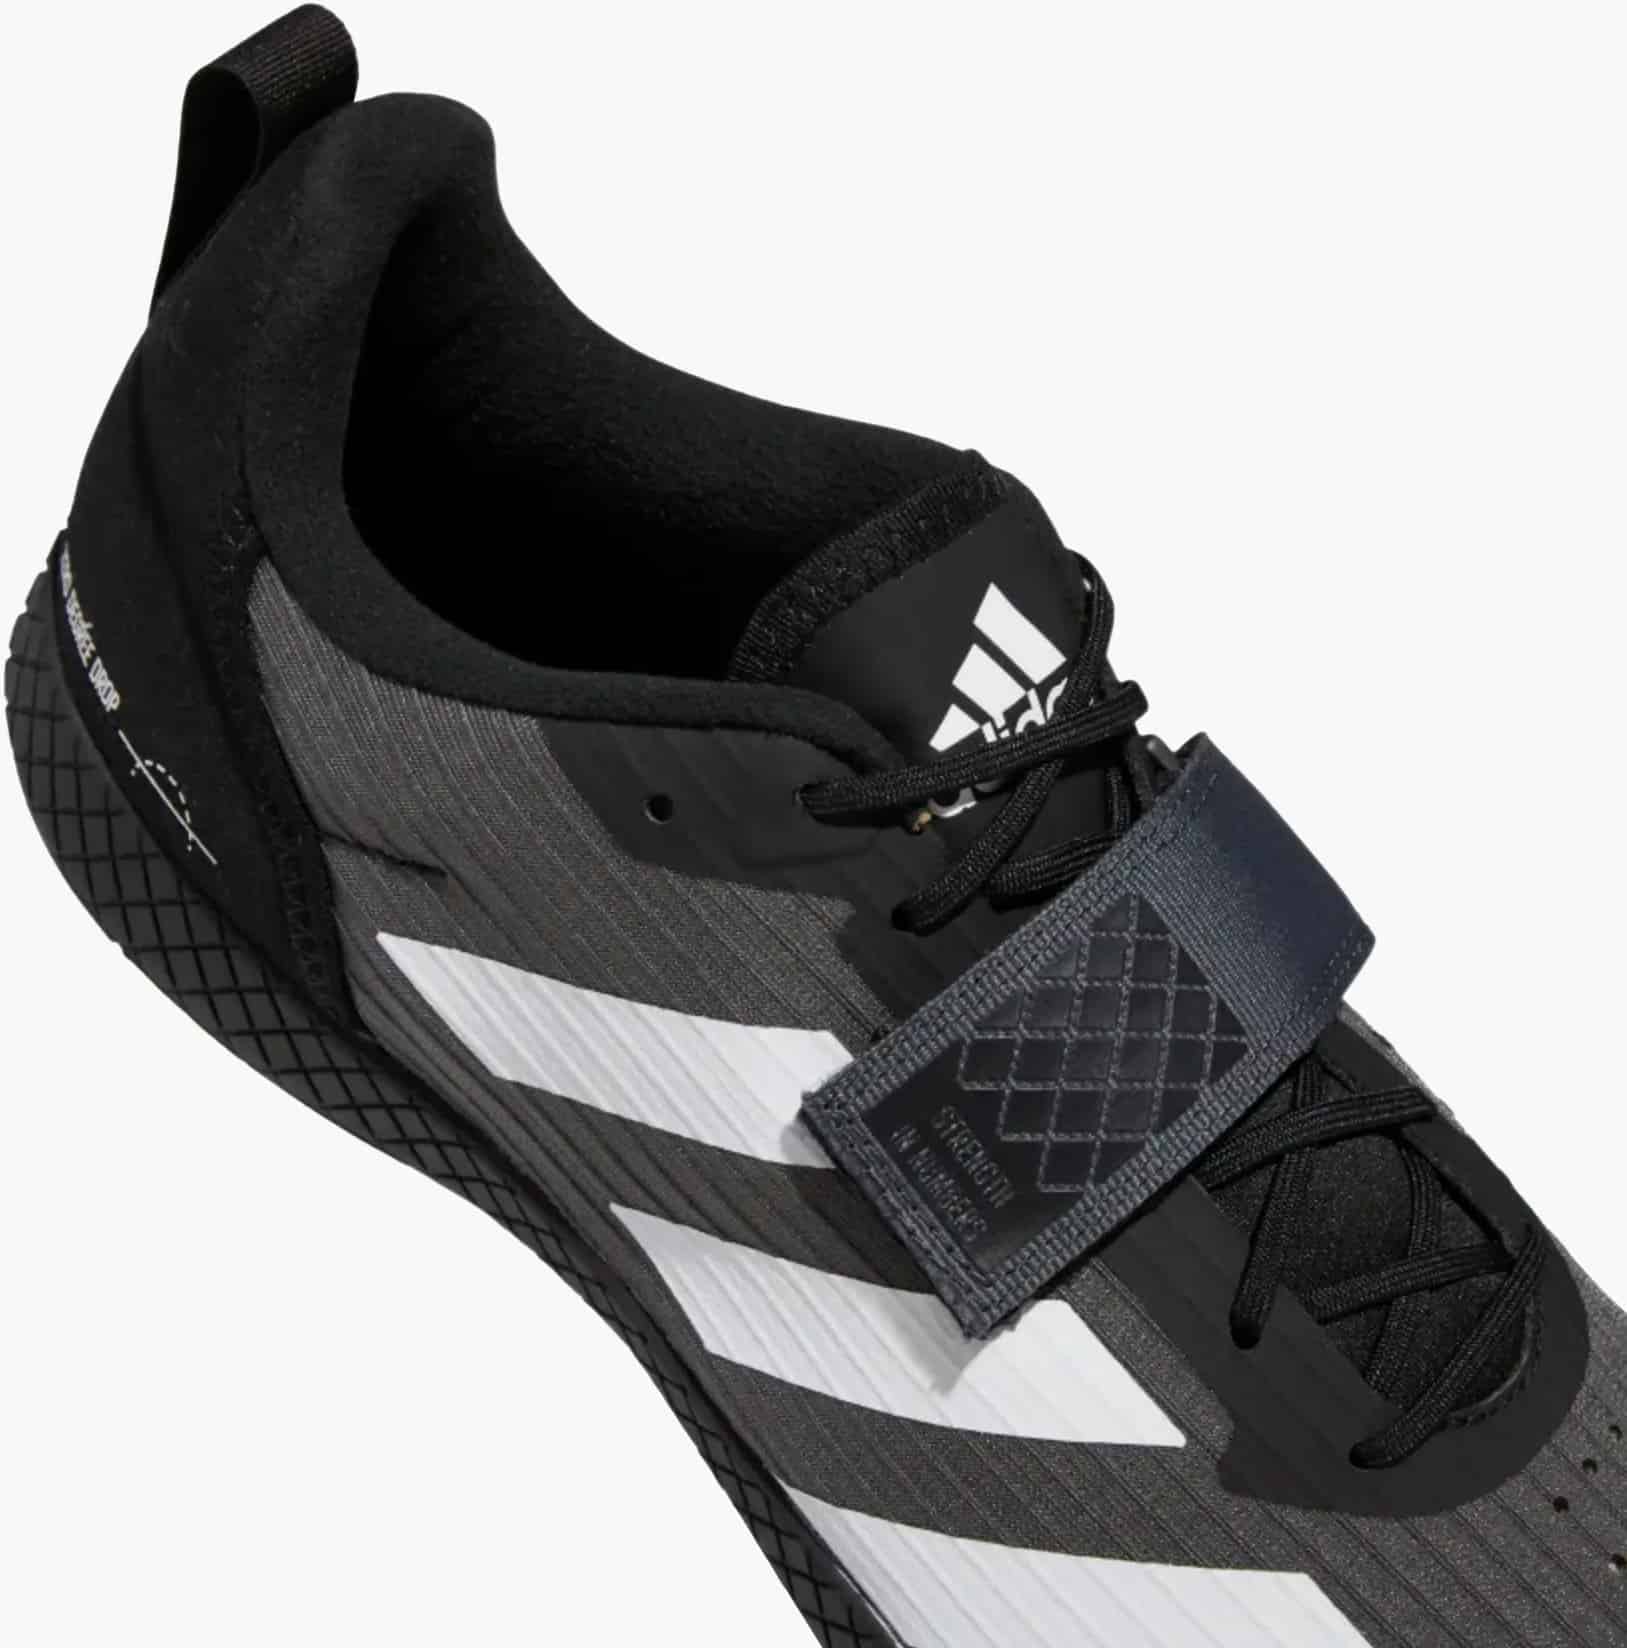 Adidas The Total Deadlift Shoes lace strap